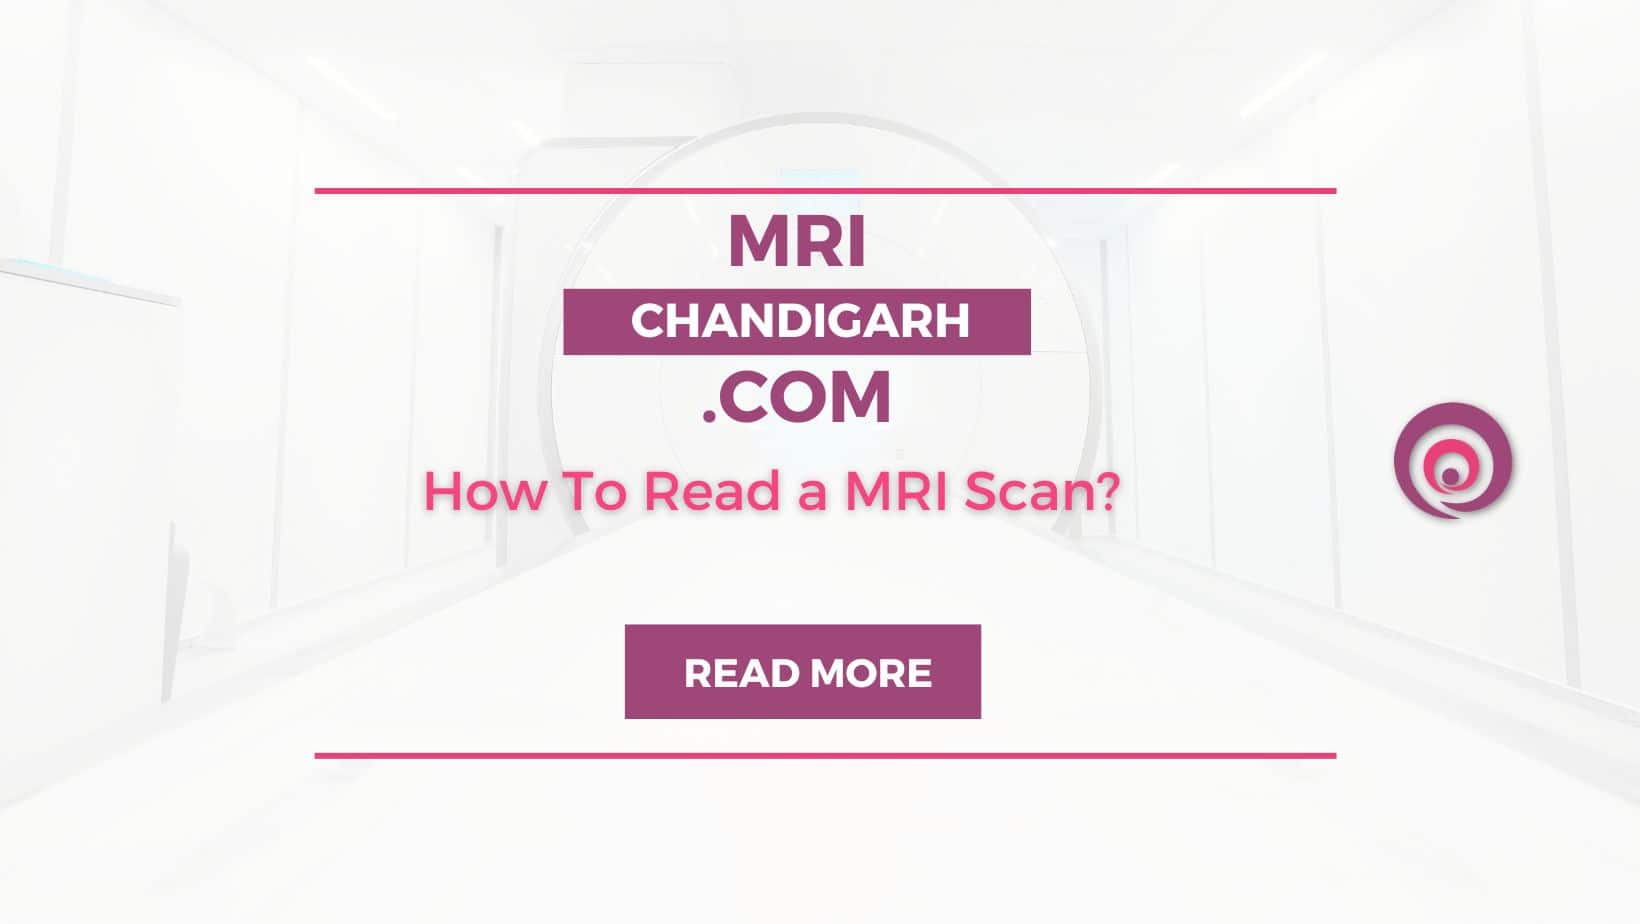 How To Read a MRI Scan?